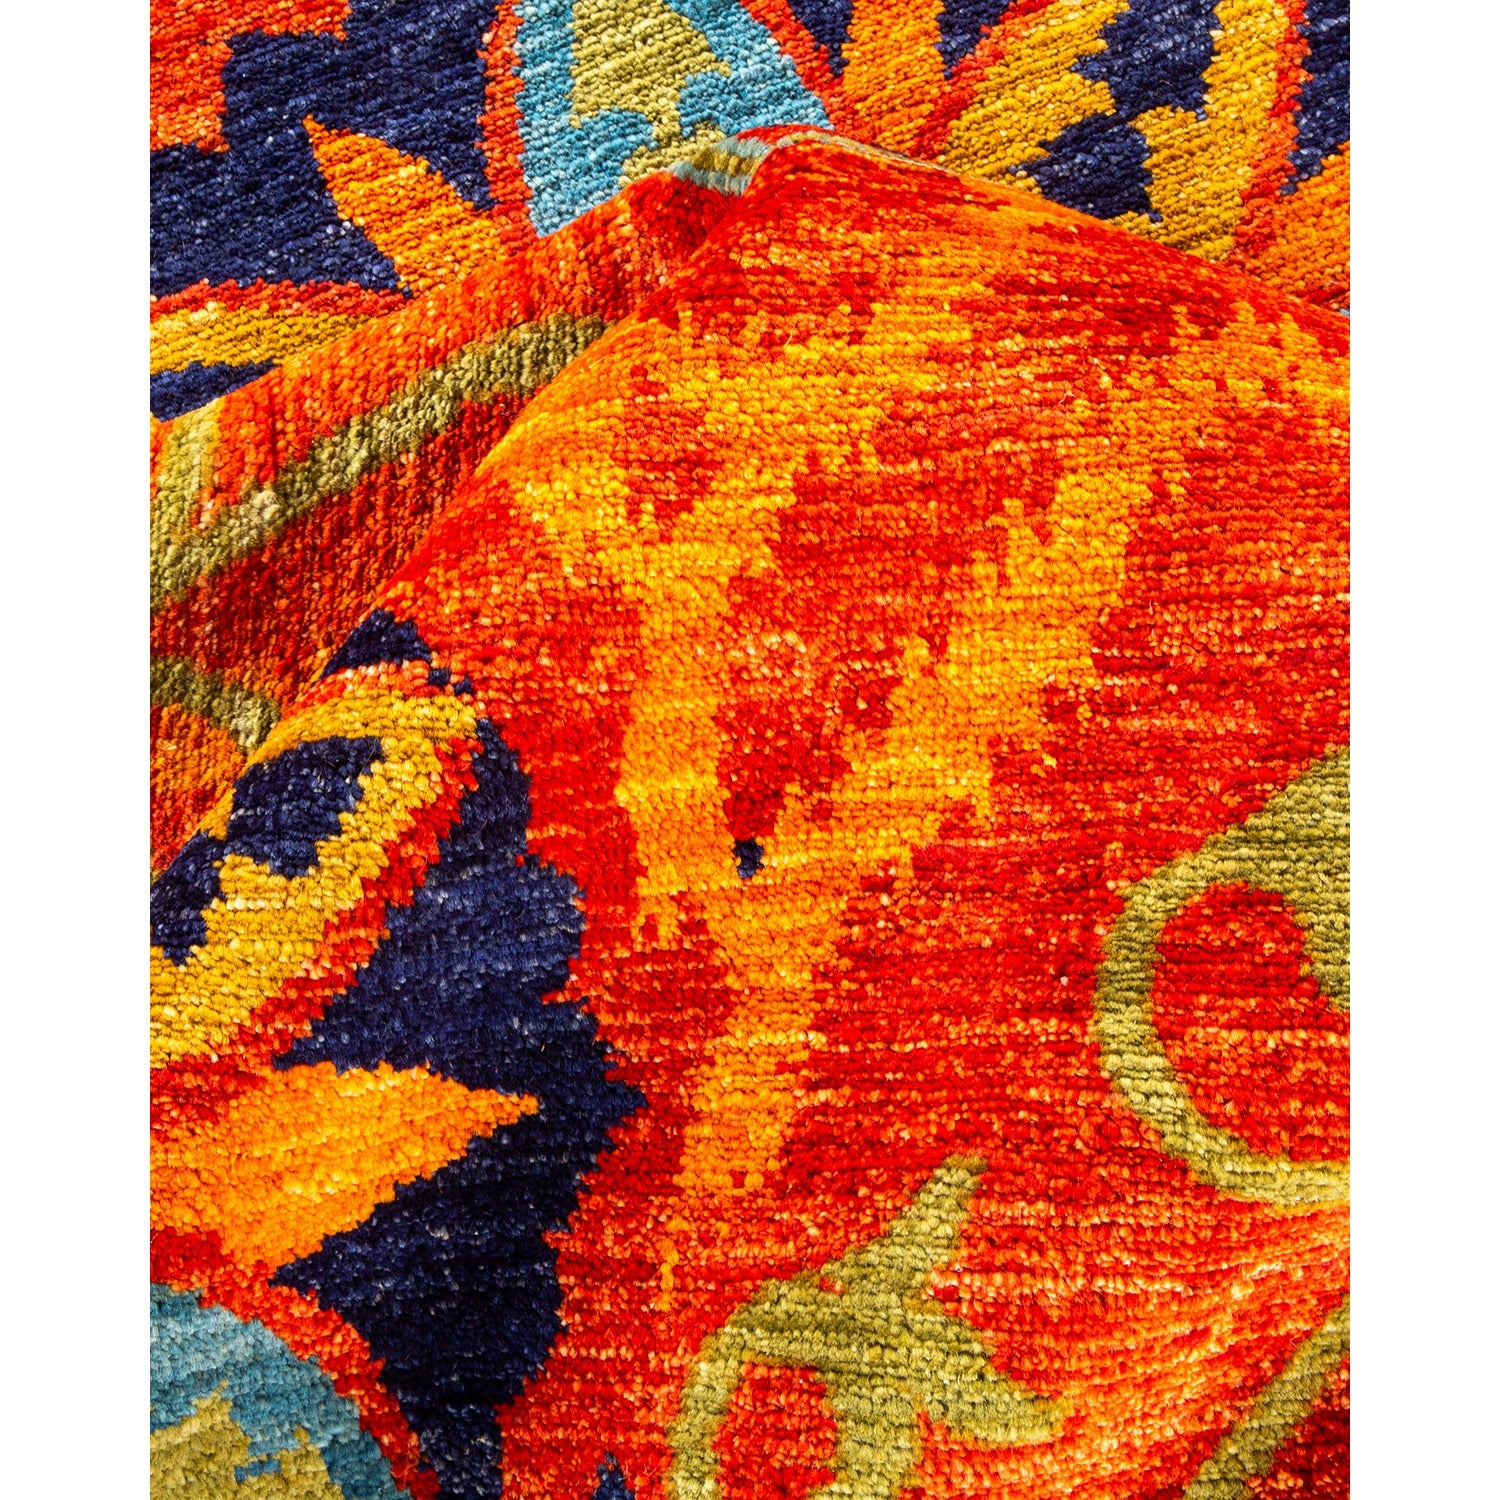 DS Suzani Hand-Knotted Rug - Orange 9' 0" x 12' 1" Default Title